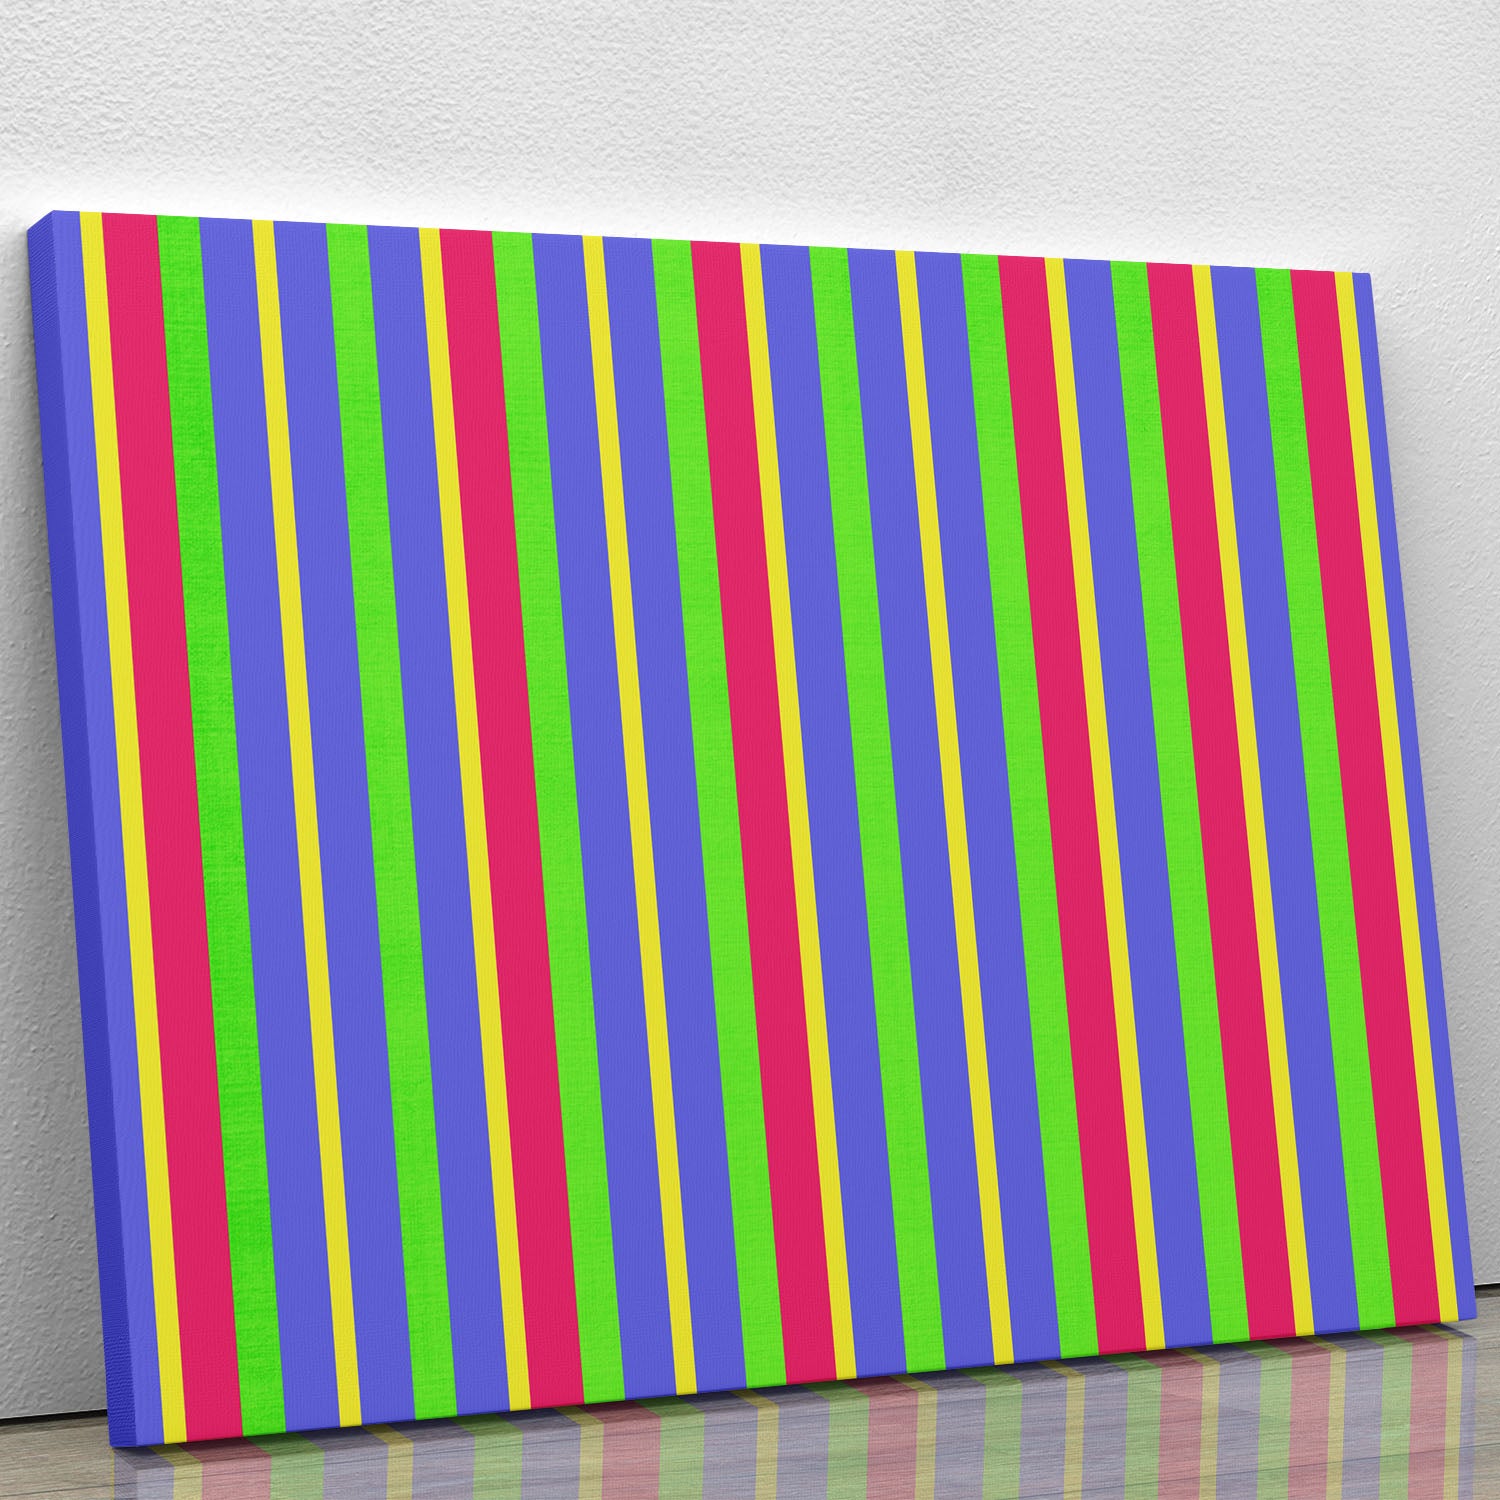 Funky Stripes Multi Canvas Print or Poster - Canvas Art Rocks - 1